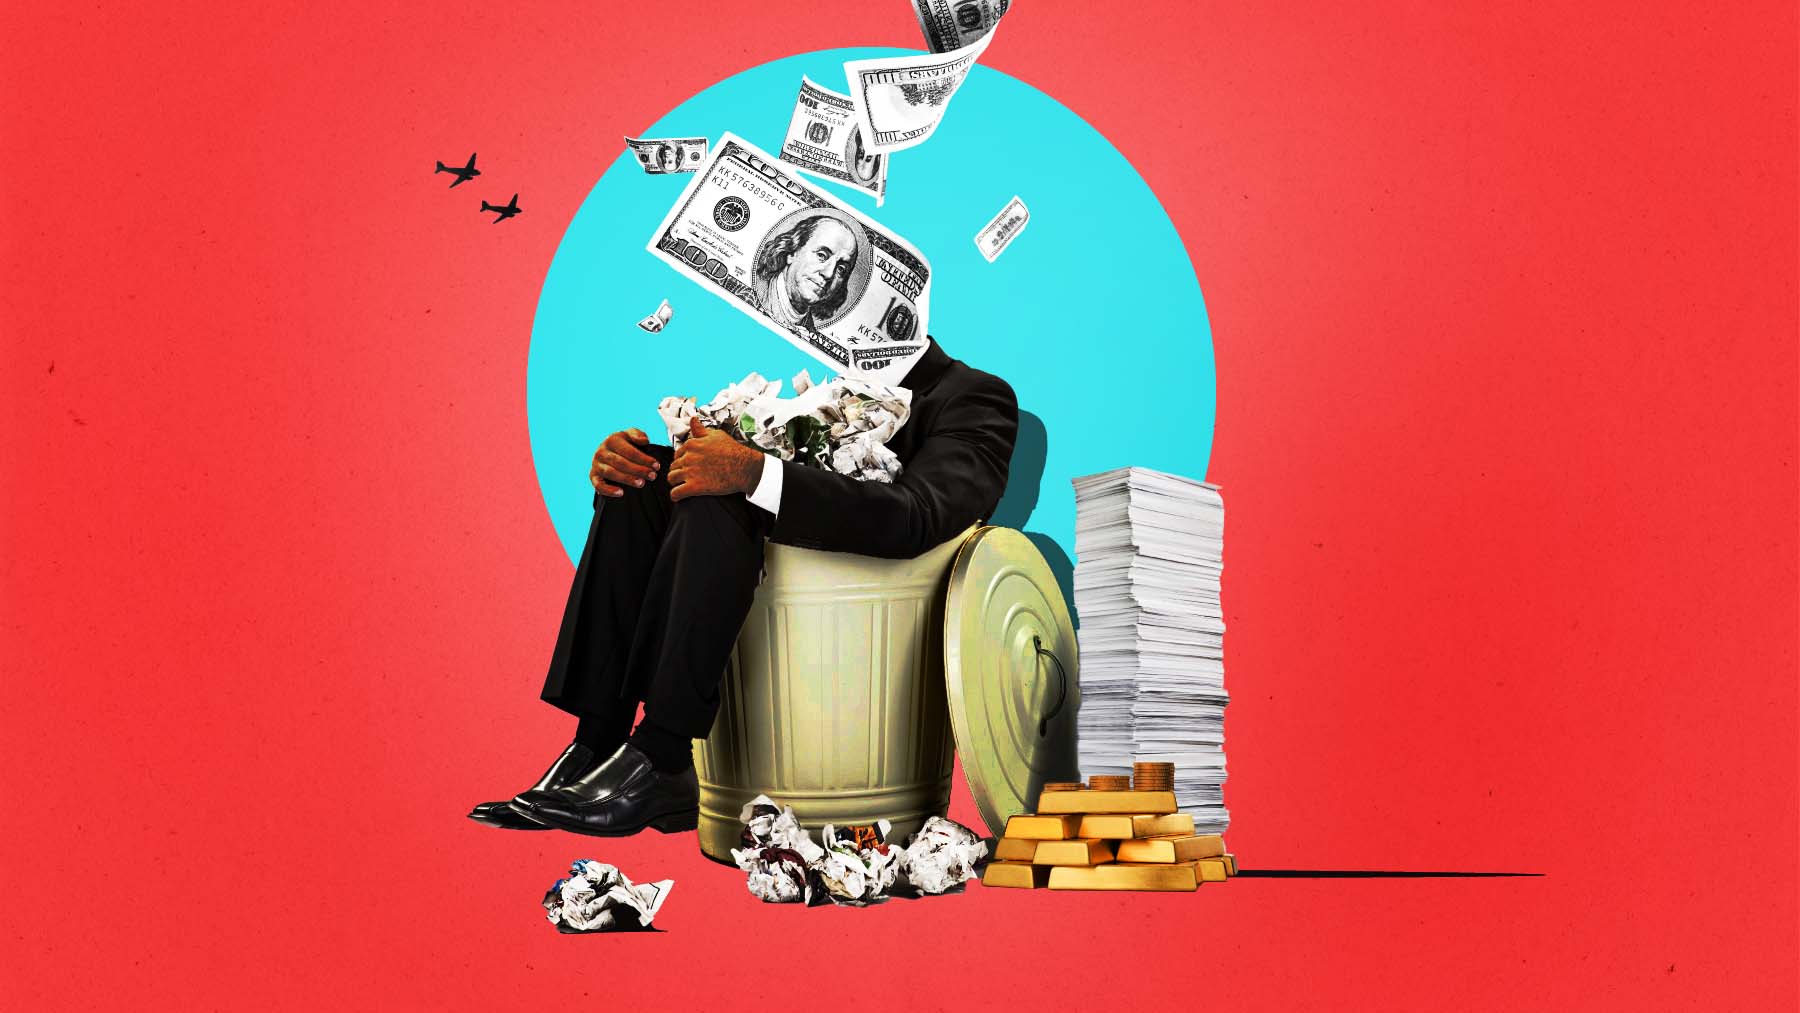 An illustration of a person in a business suit, sitting in a trashcan surrounded by crumpled up trash, gold bars, and a stack of paper. The head of the person is replaced by cascading hundred dollar bills.